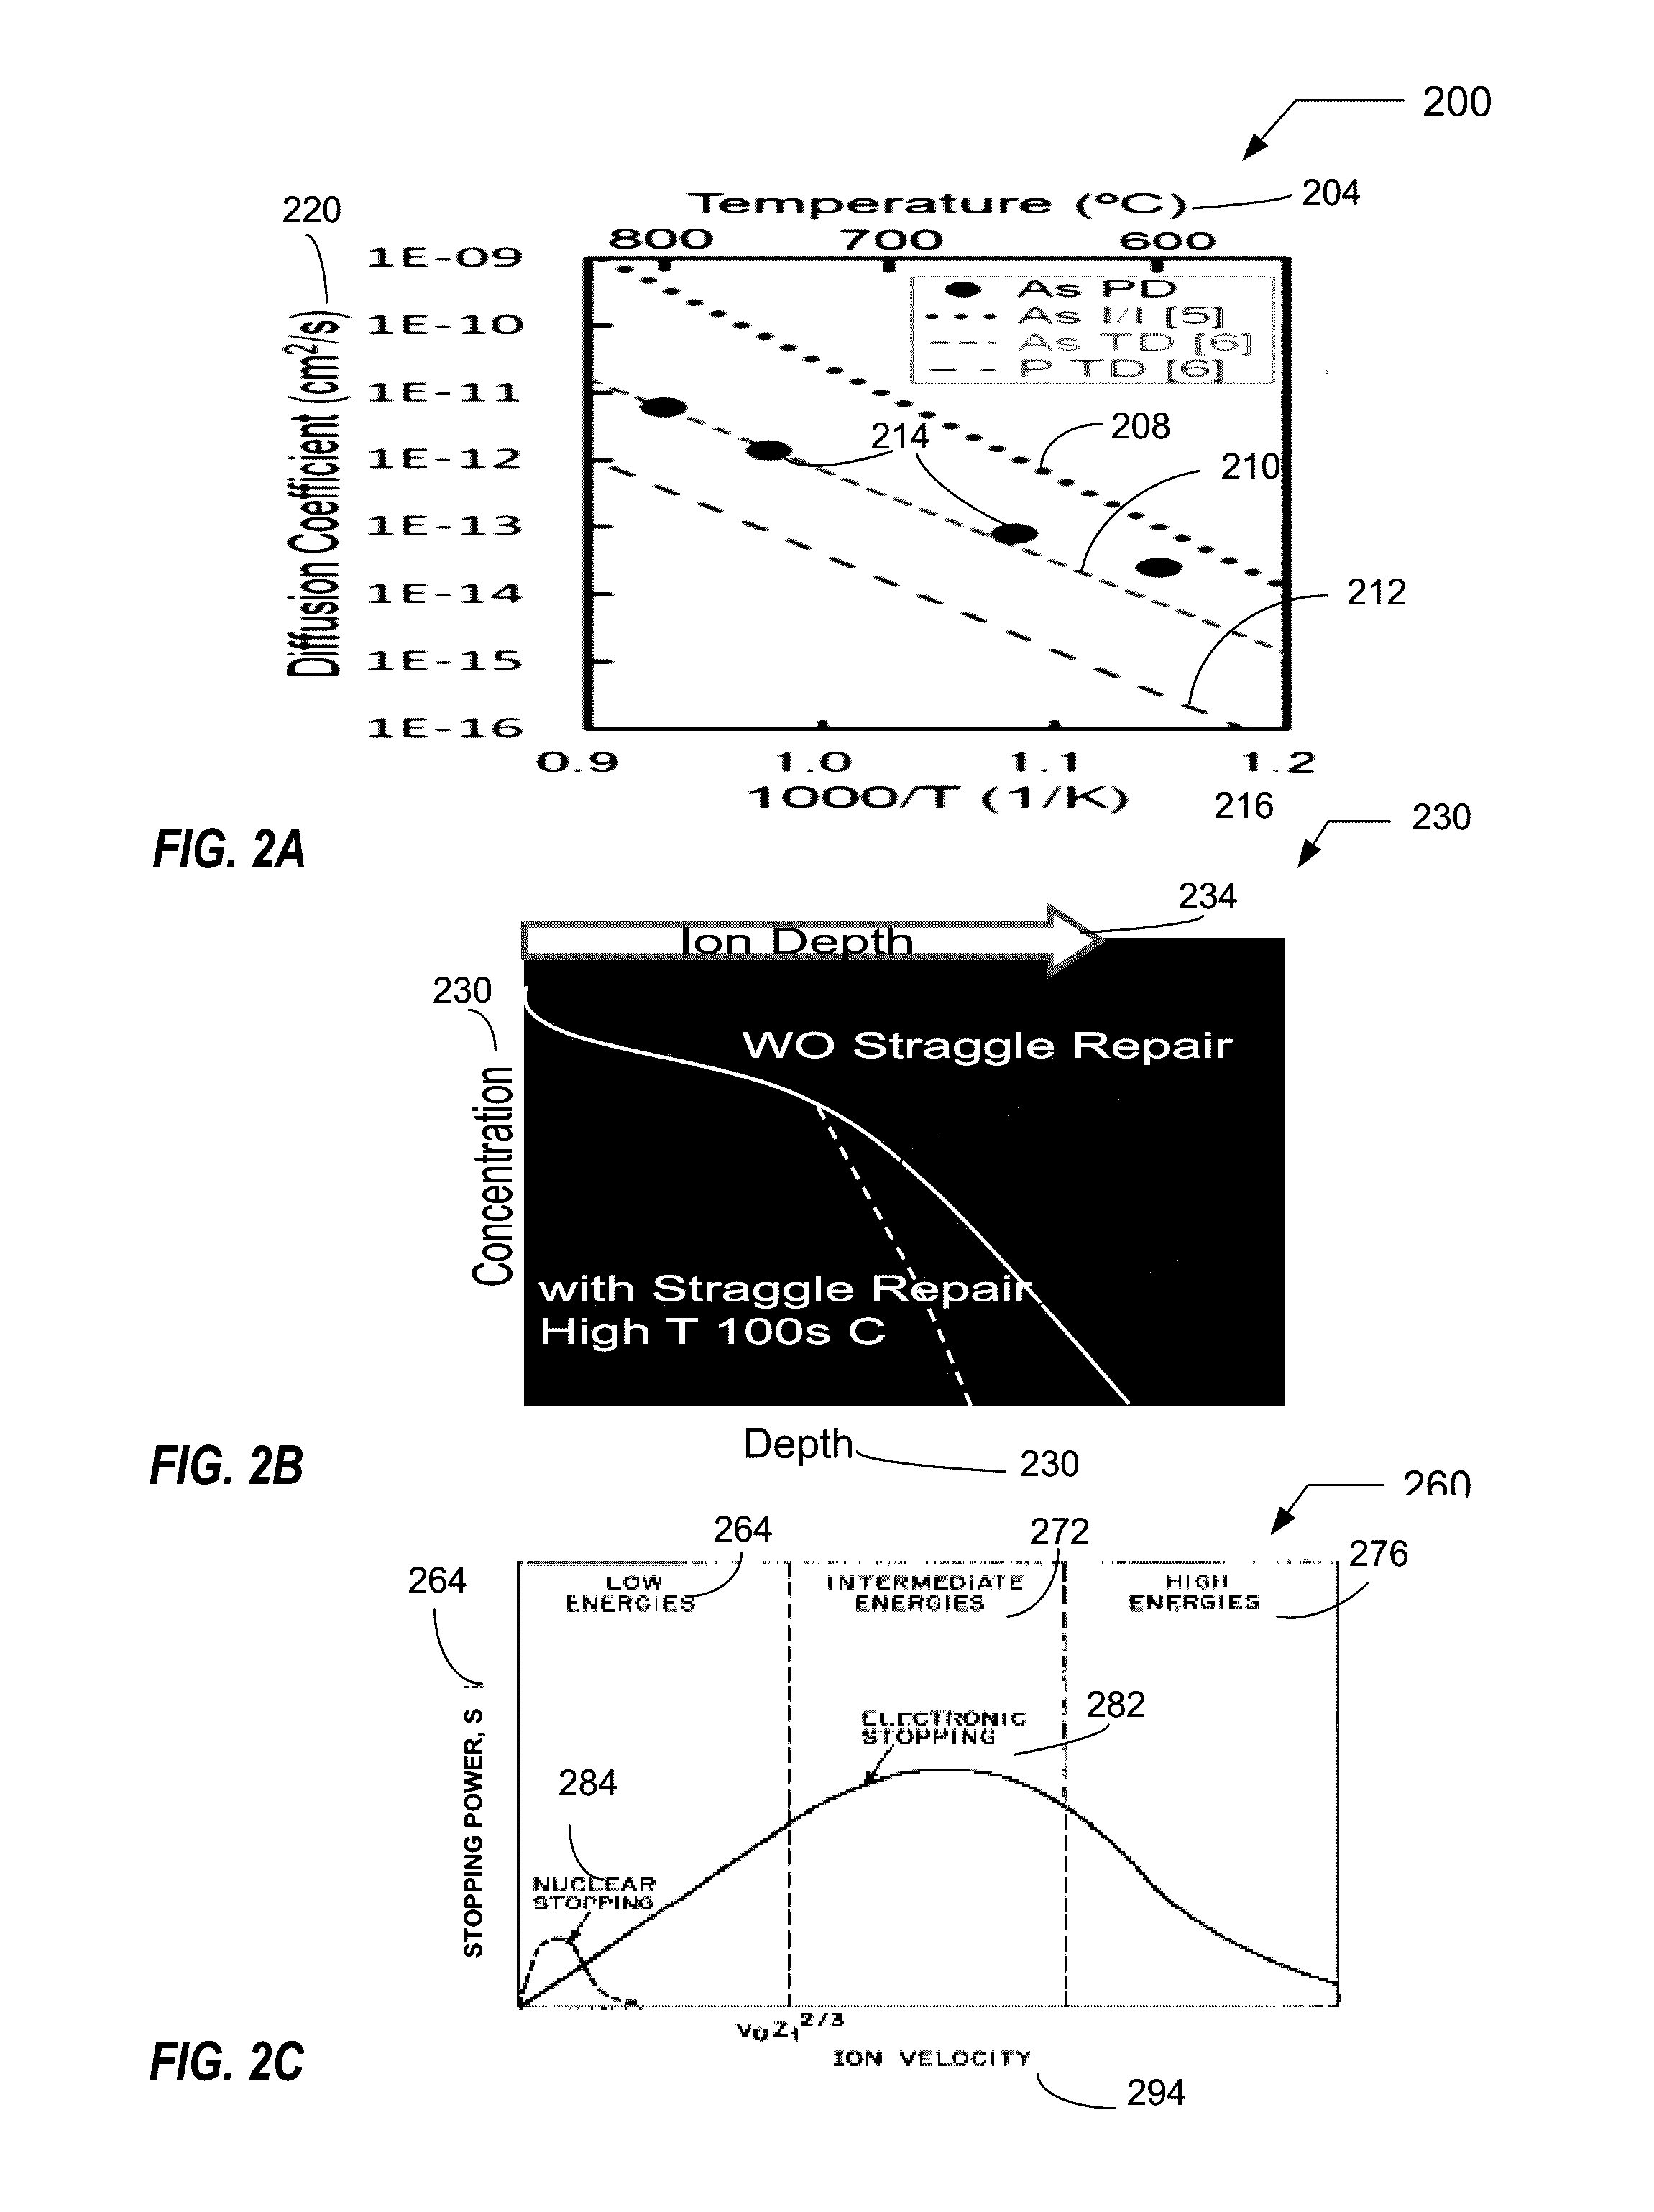 Method for Using Heated Substrates for Process Chemistry Control